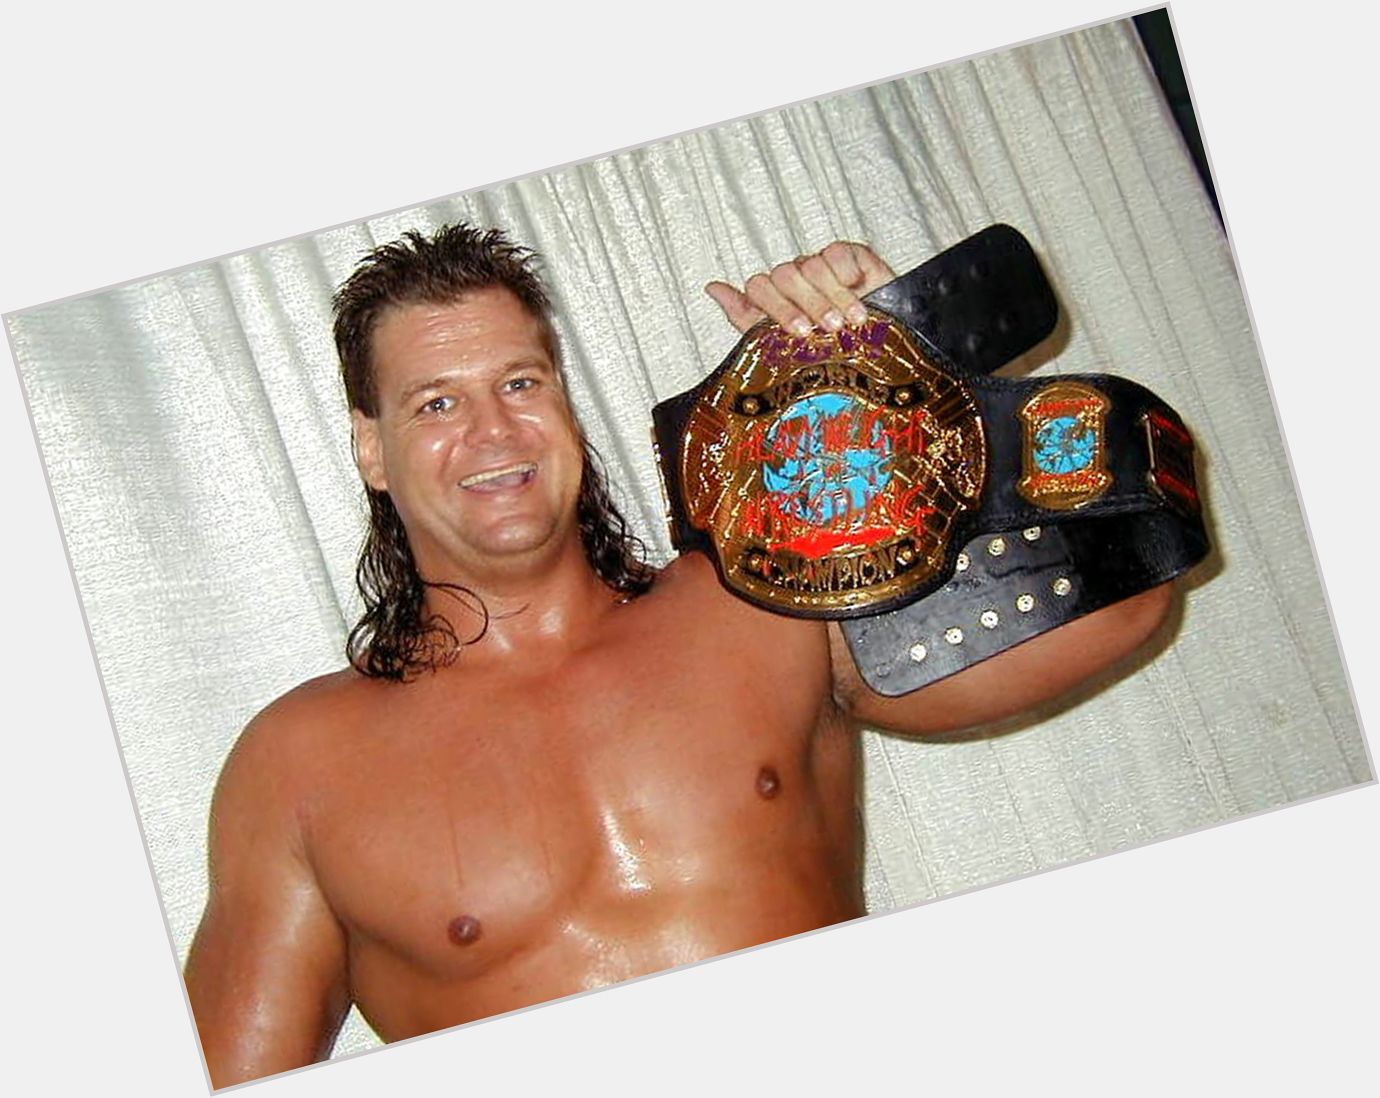 Https://fanpagepress.net/m/M/Mike Awesome New Pic 1